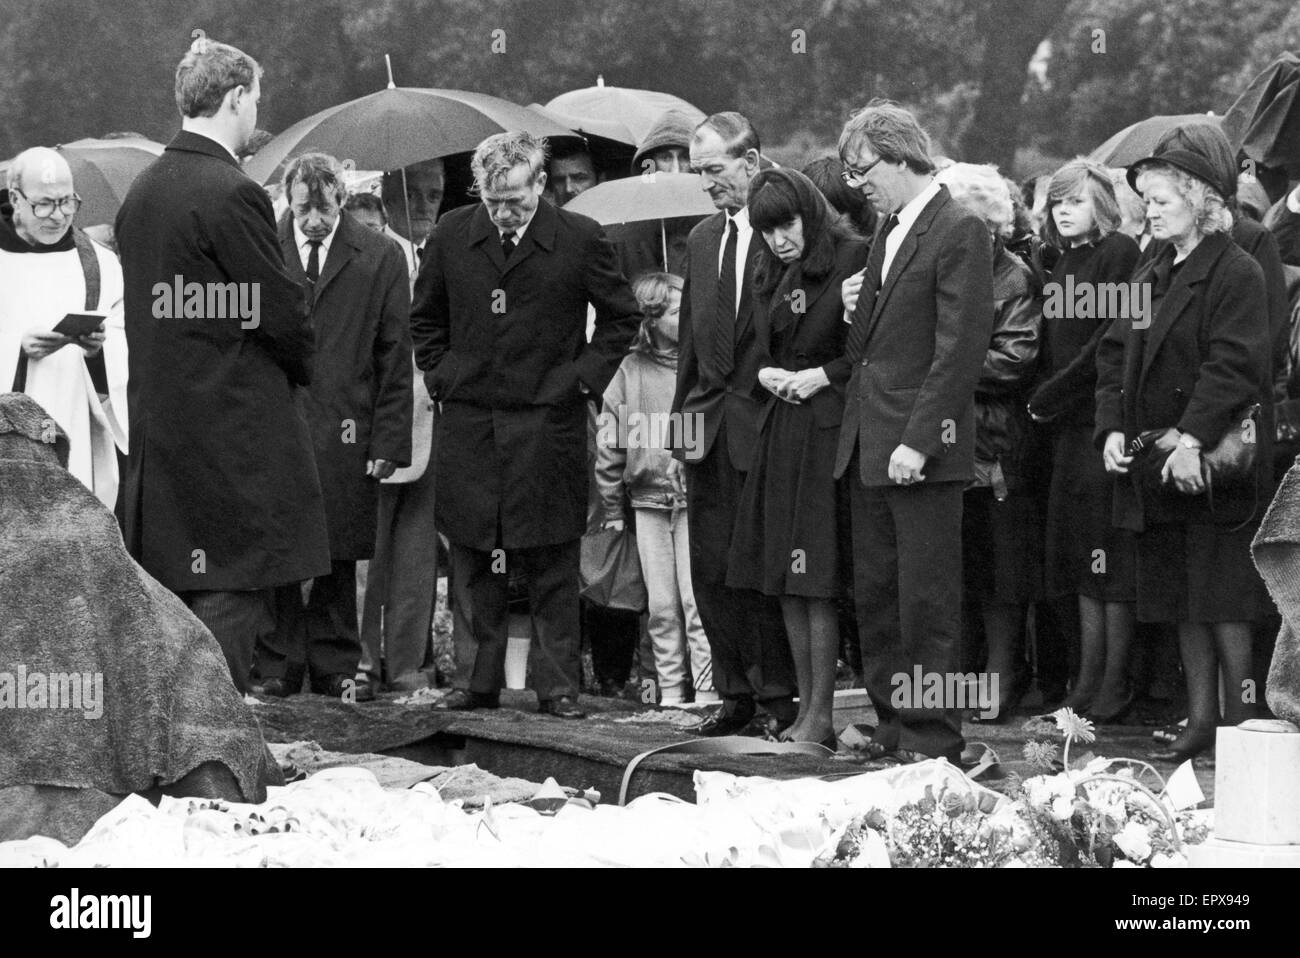 Funeral of Pauline Reade, 6th August 1987.  Pictured, Joan Reade mother, Amos Reade father and Paul Reade brother.  The remains of Pauline Reade, were found on Saddleworth Moor, near Oldham, in the early hours of 1st July 1987. Pauline Reade was abducted Stock Photo